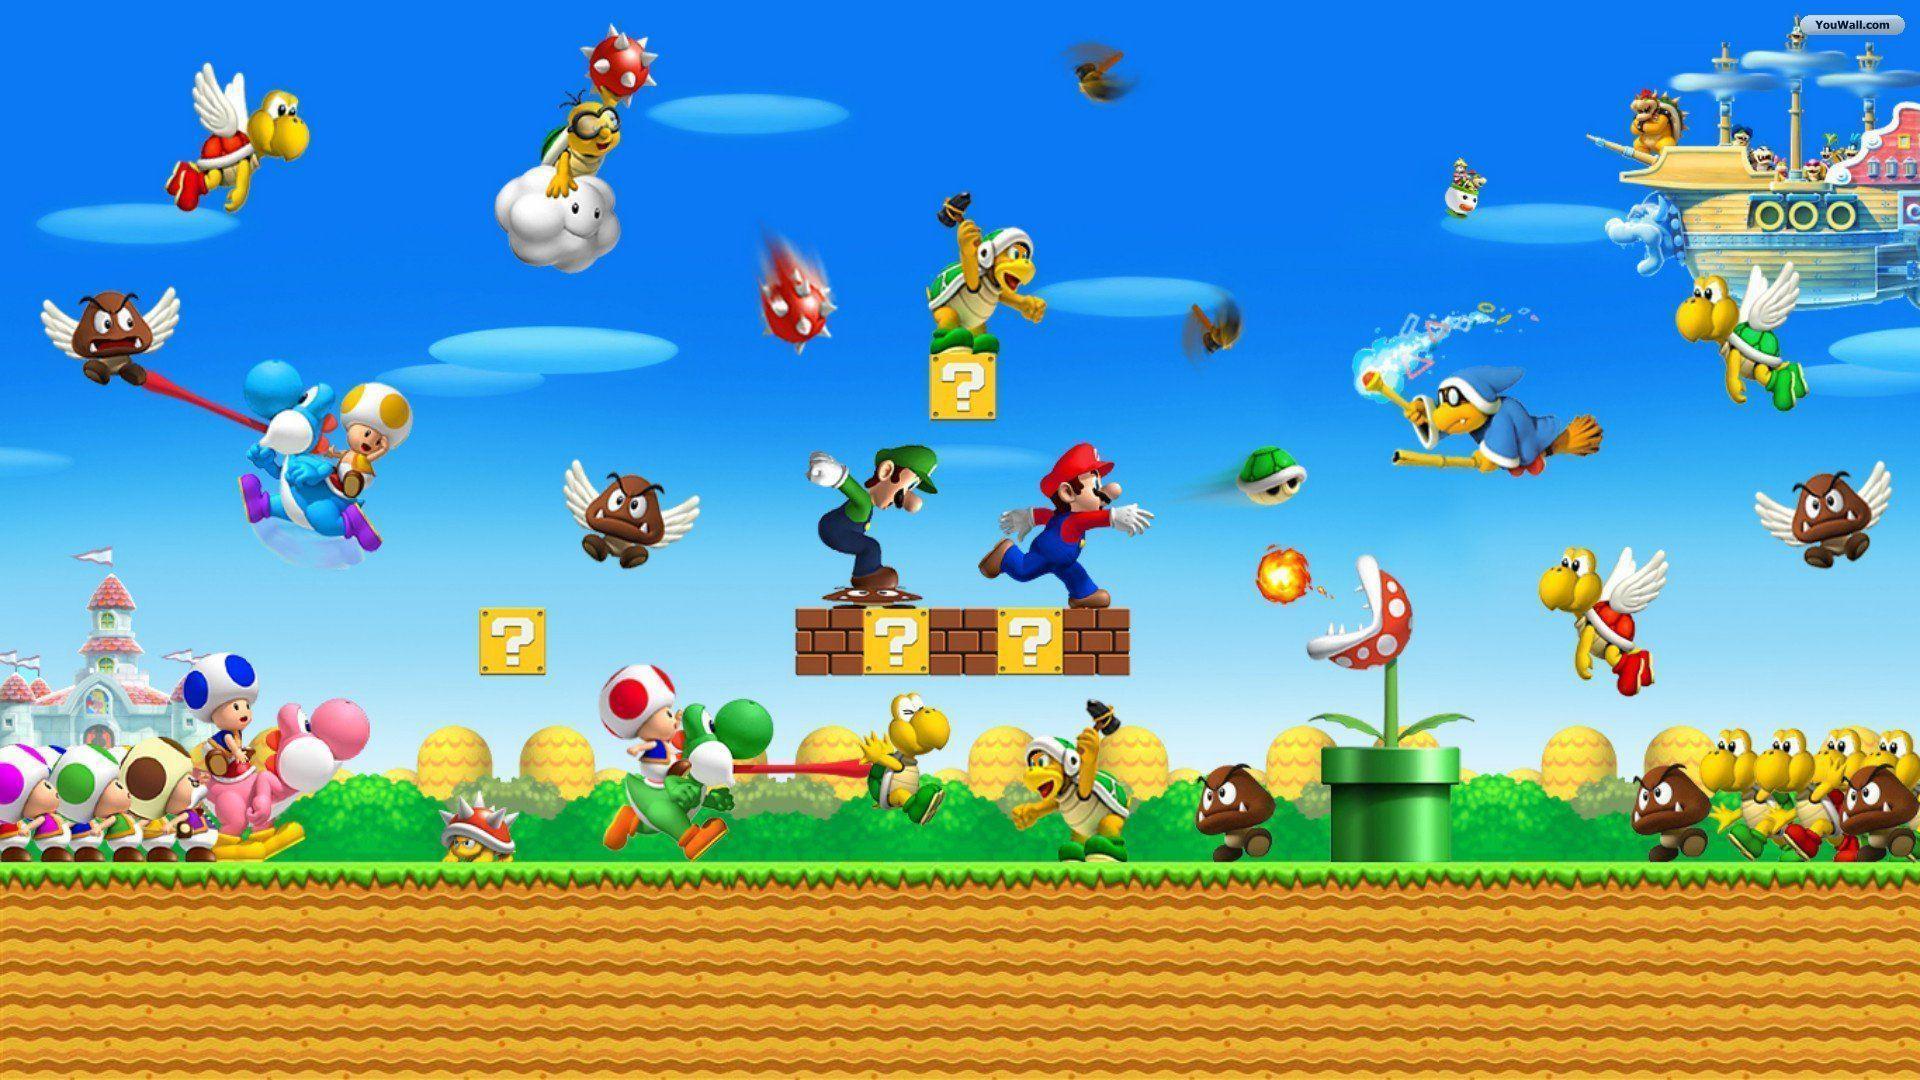 Wallpaper mario background games gallery 1920x1080 px